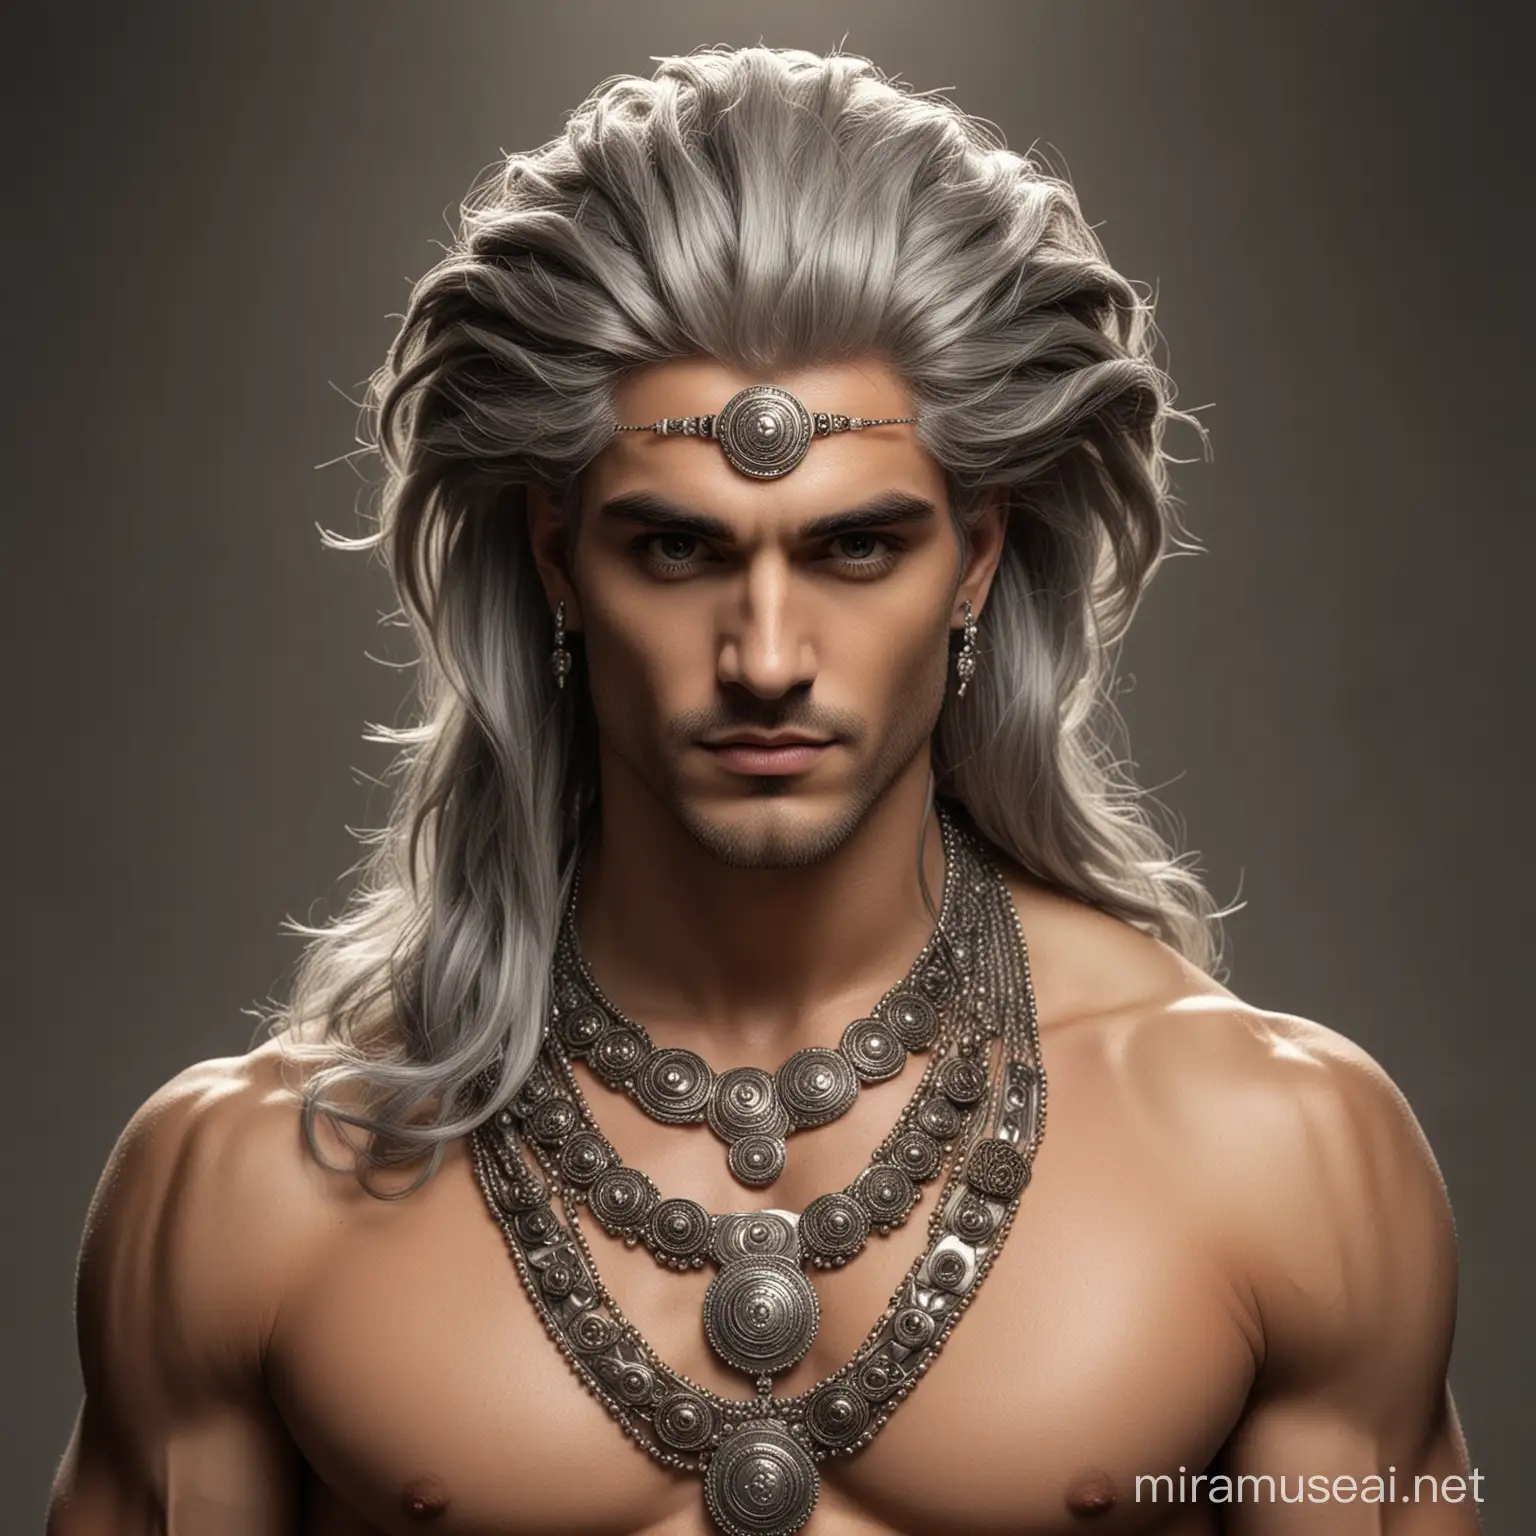 Majestic Prometheus Deity in Earth Tones with Indian Jewelry